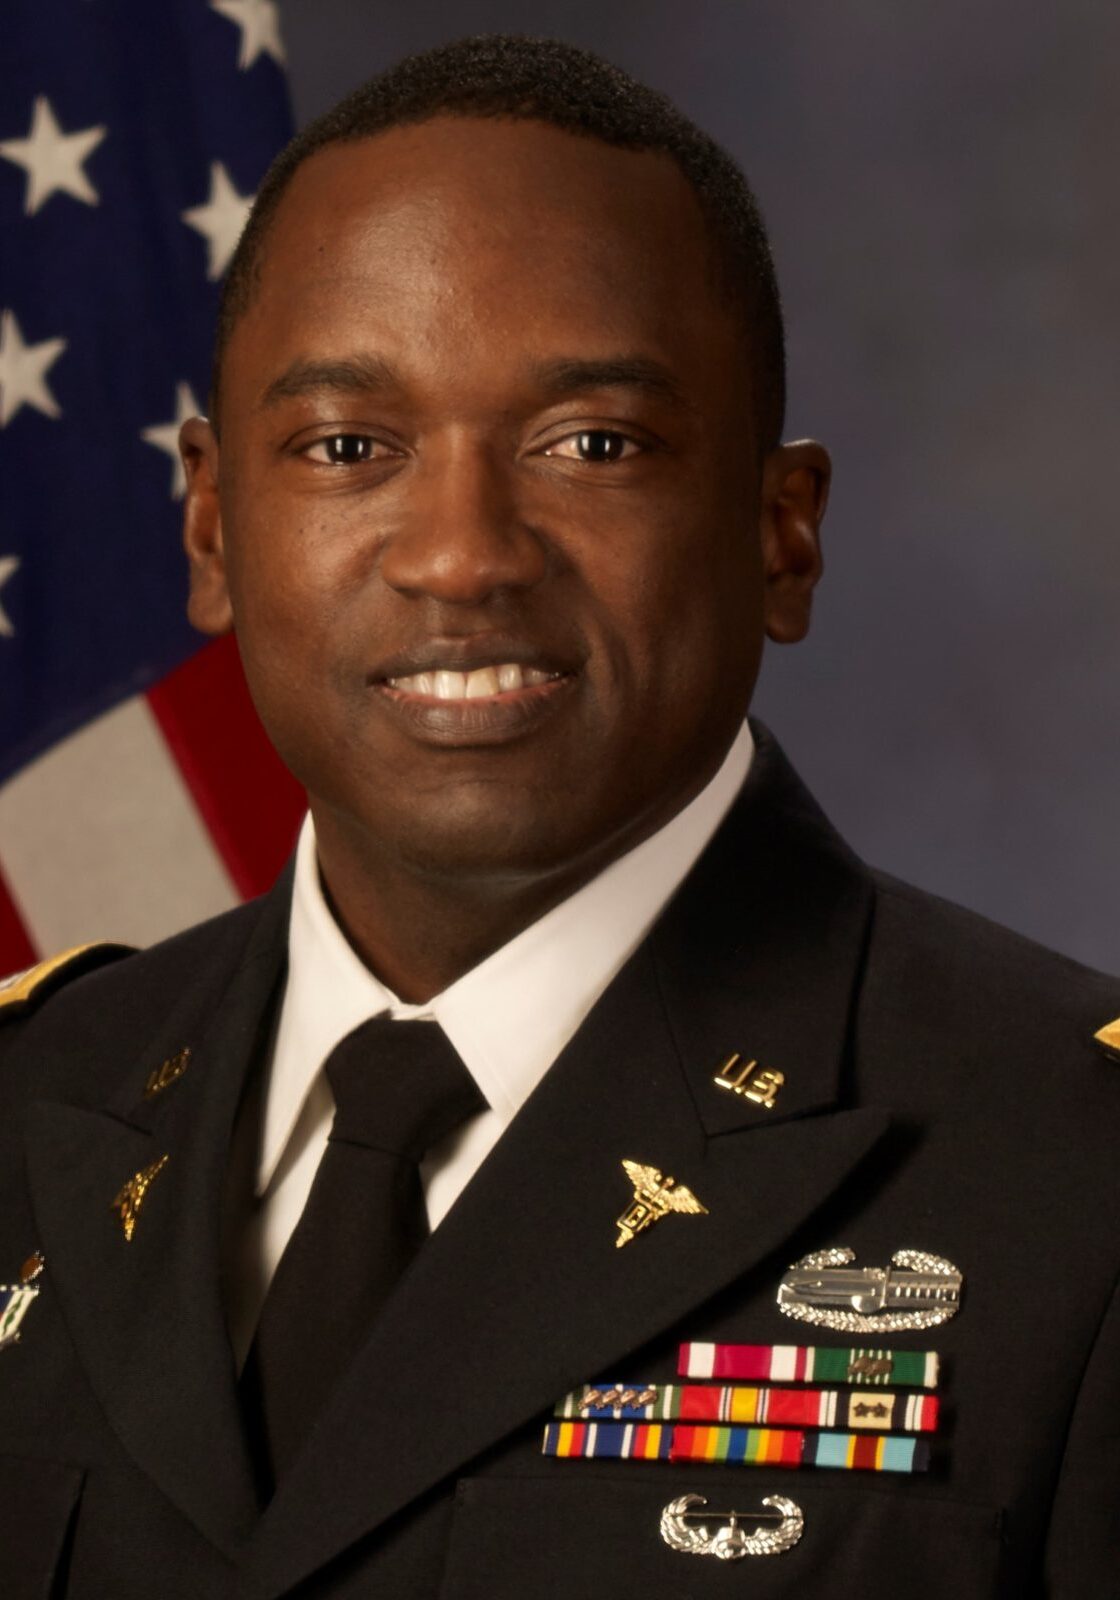 Dr. Dentonio Worrell, a Brooklyn native, journeyed from Barbados to a successful dental career. After graduating from the University of Maryland Dental School, he served as a US Army General Dentist for five years. Specializing in Endodontics, he earned board certification in 2012. Presently, he leads the US Army Dental Health Activity-Hawaii, mentors in a residency program, and enjoys family time, travel, hiking, investing, and volunteering.